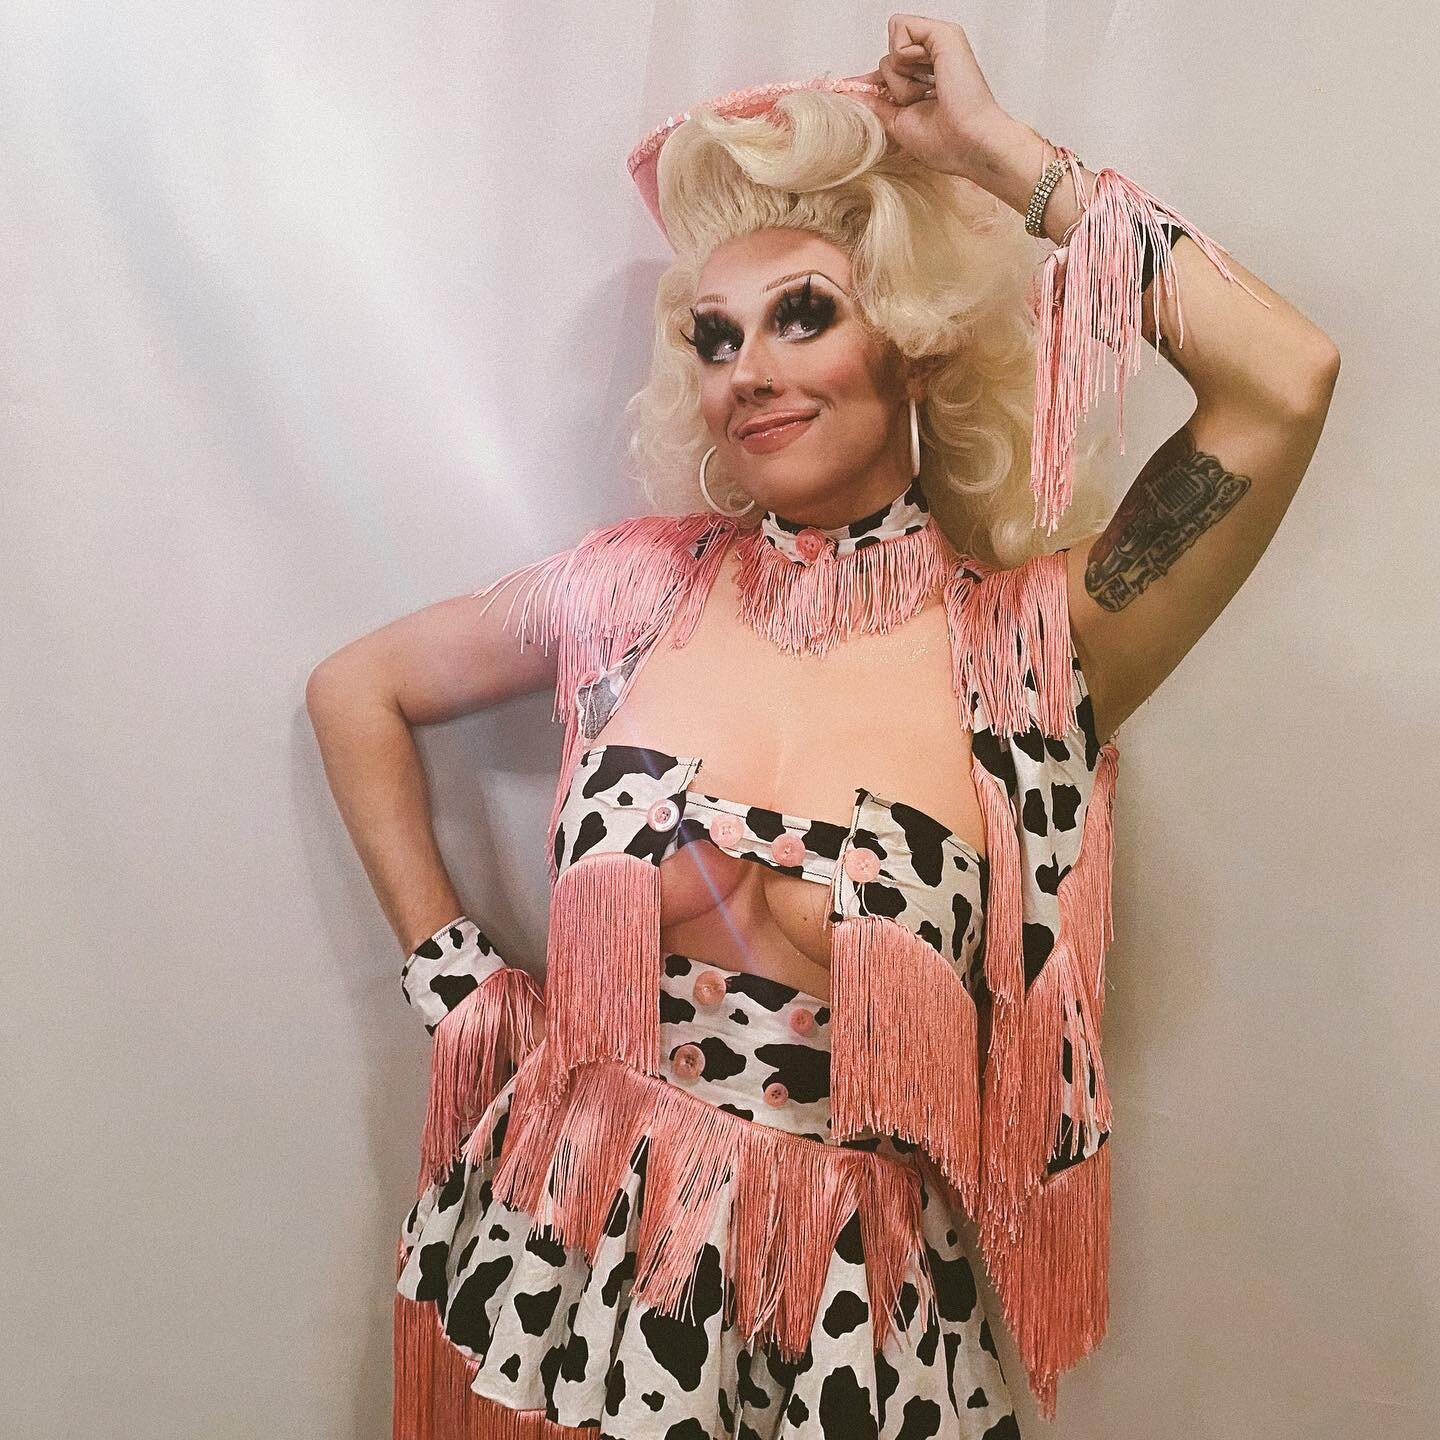 Yee-fuckin-haa 🐄 
Made this lil ditty earlier this year 💖
Hair by @itssecretqueen 
Fit by me
Tibbies by dr. God.